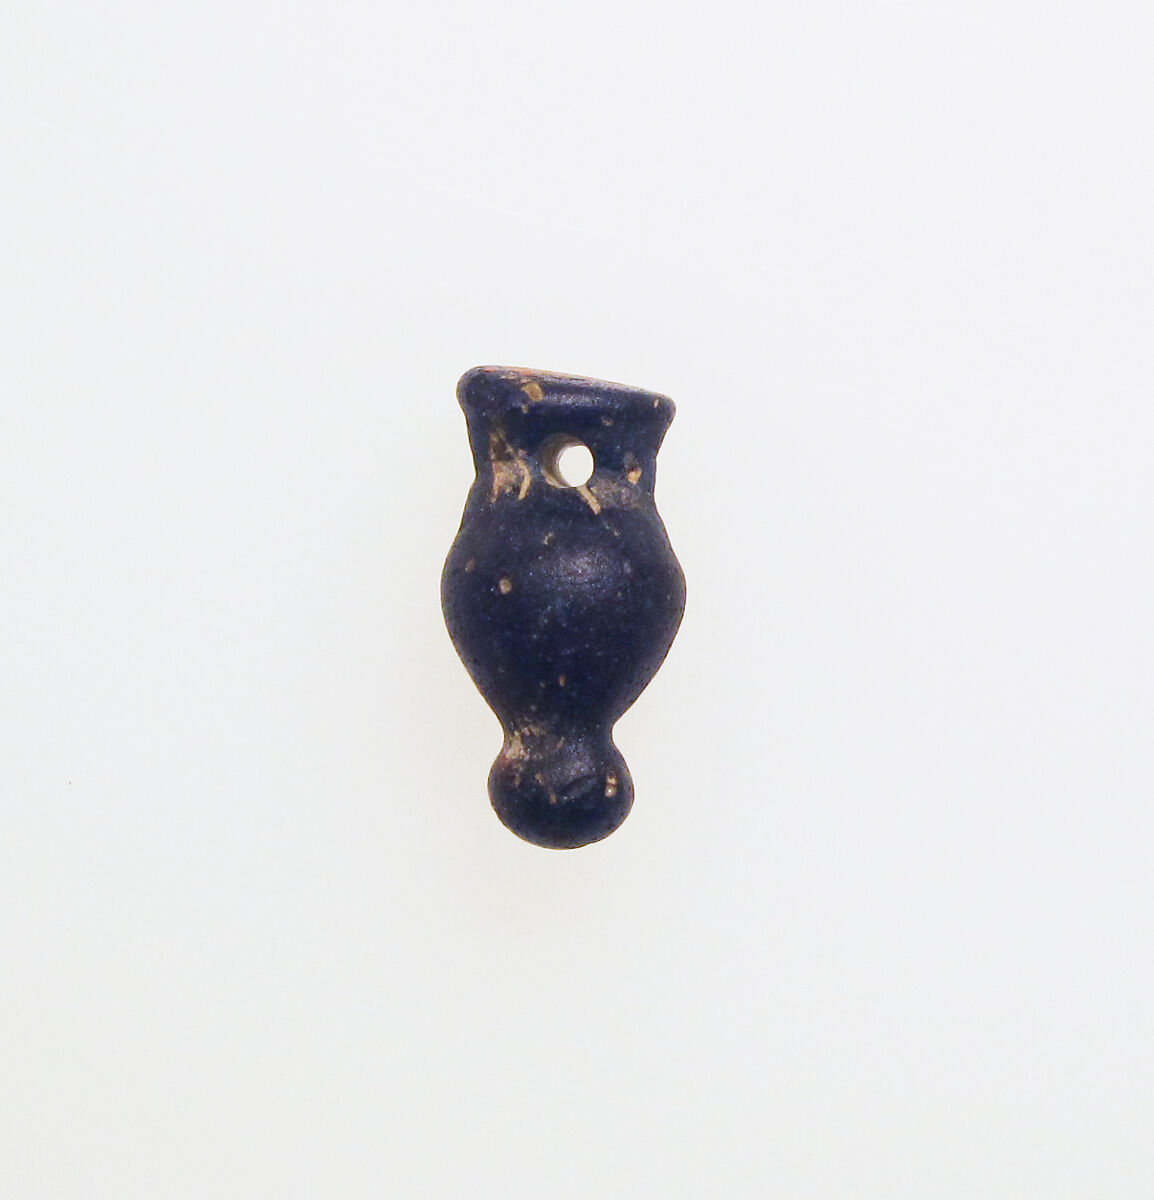 Glass pendant in the form of an amphora, Glass, Phoenician? 